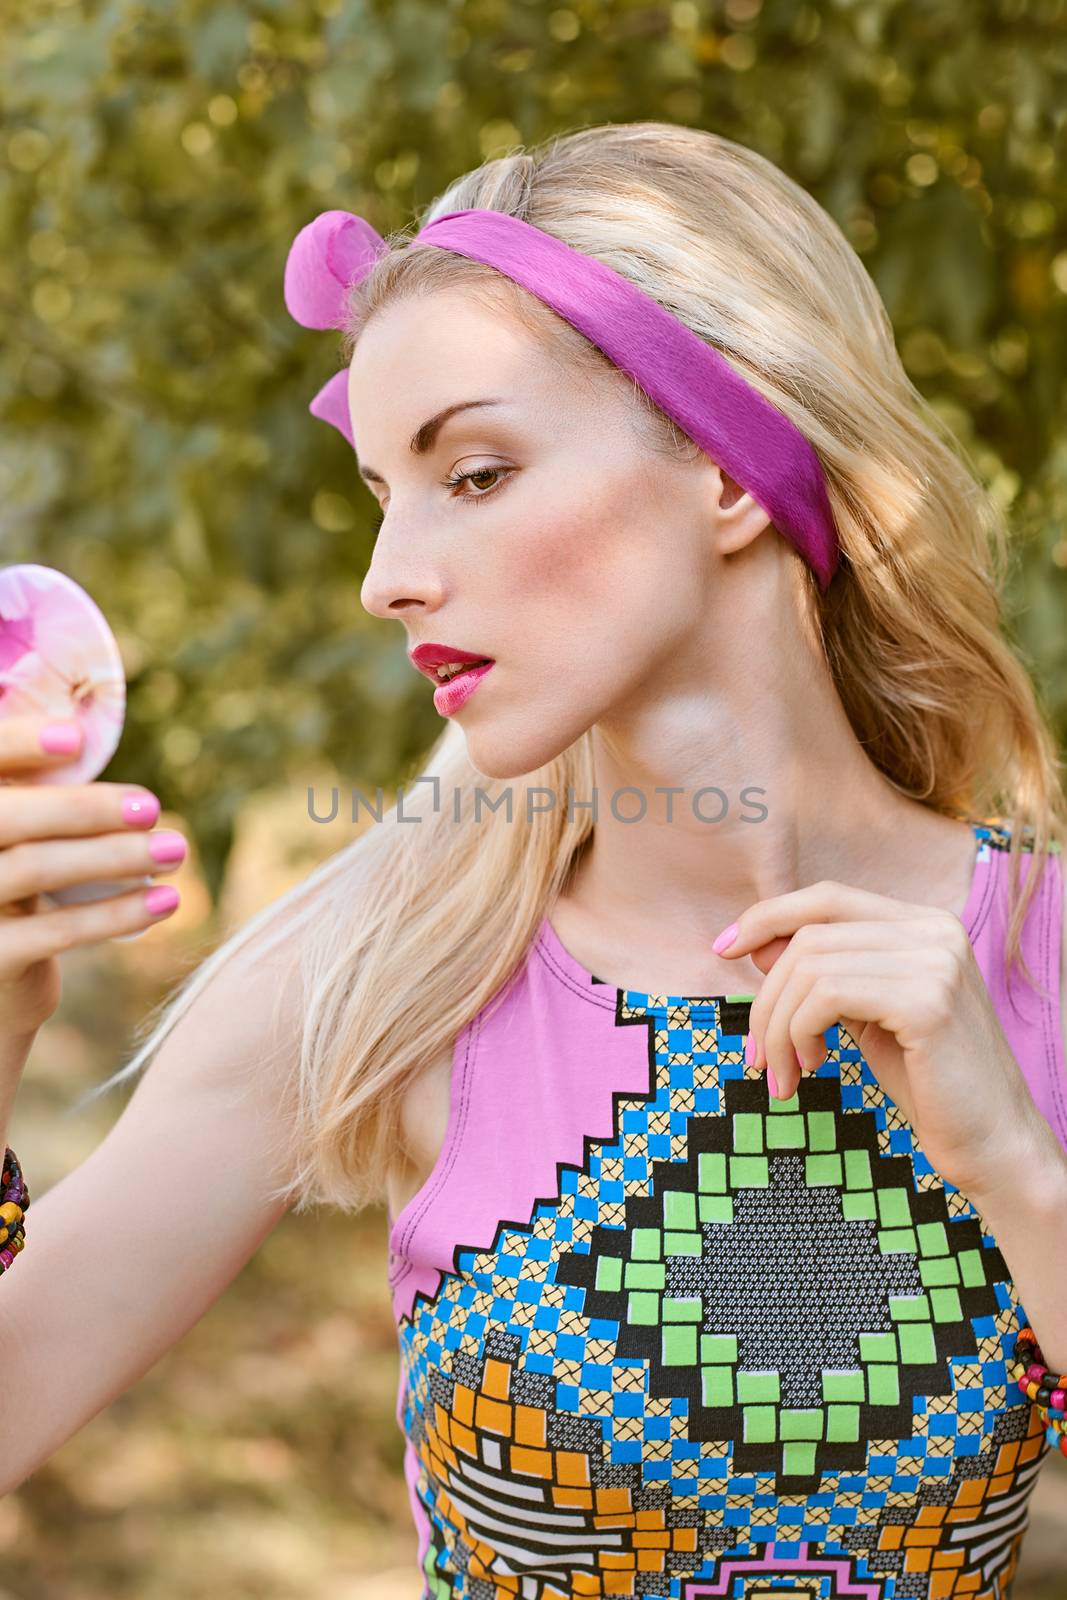 Beauty portrait stylish playful woman primping with mirror in park, people, outdoors. Attractive hipster happy pretty blonde girl with bow, fashionable top. Relax in summer garden, lifestyle, bokeh